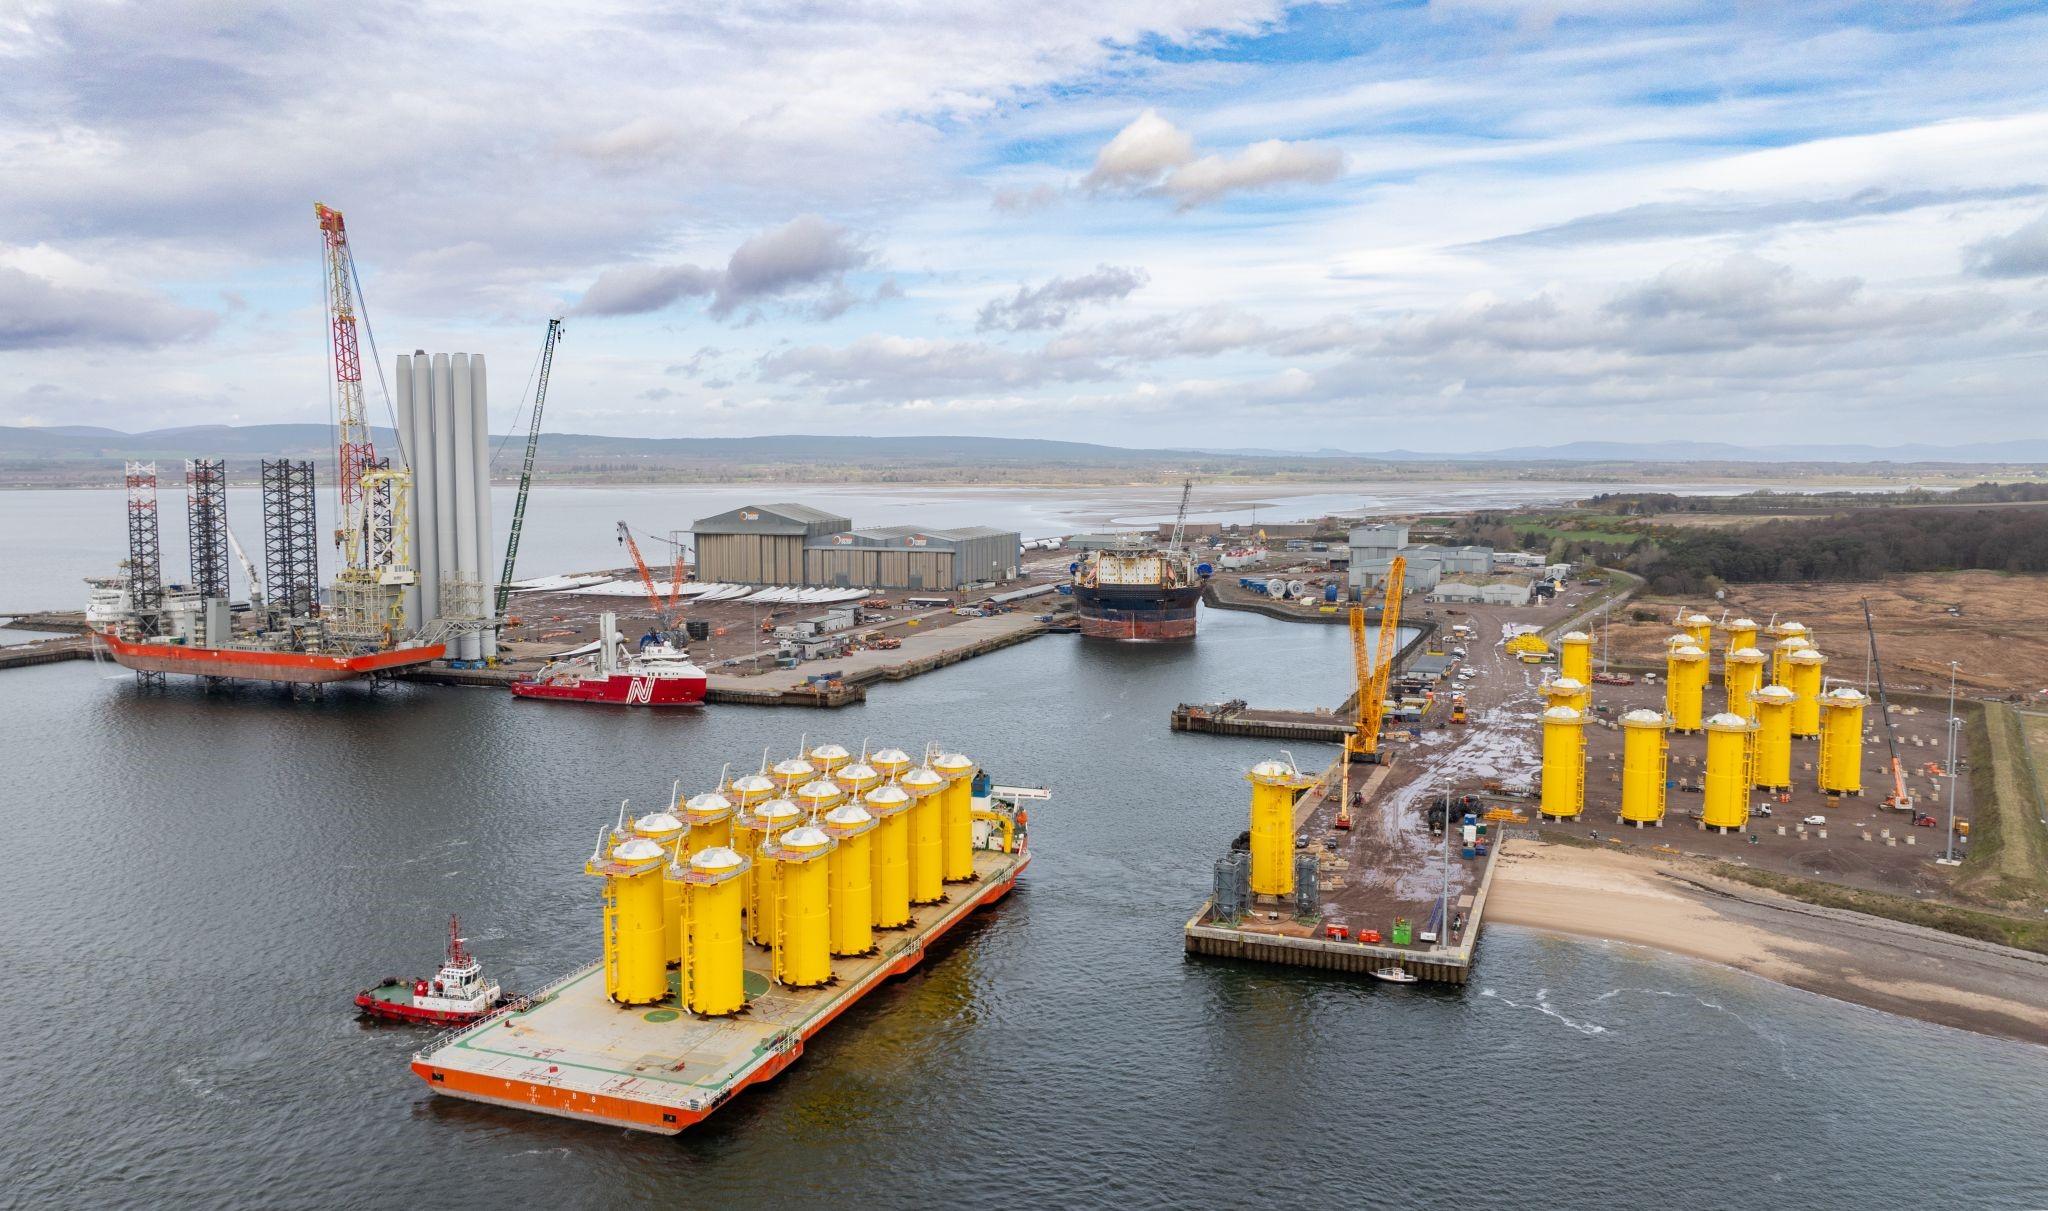 Port of Nigg completes the first phase of the Moray West Offshore Wind Farm.